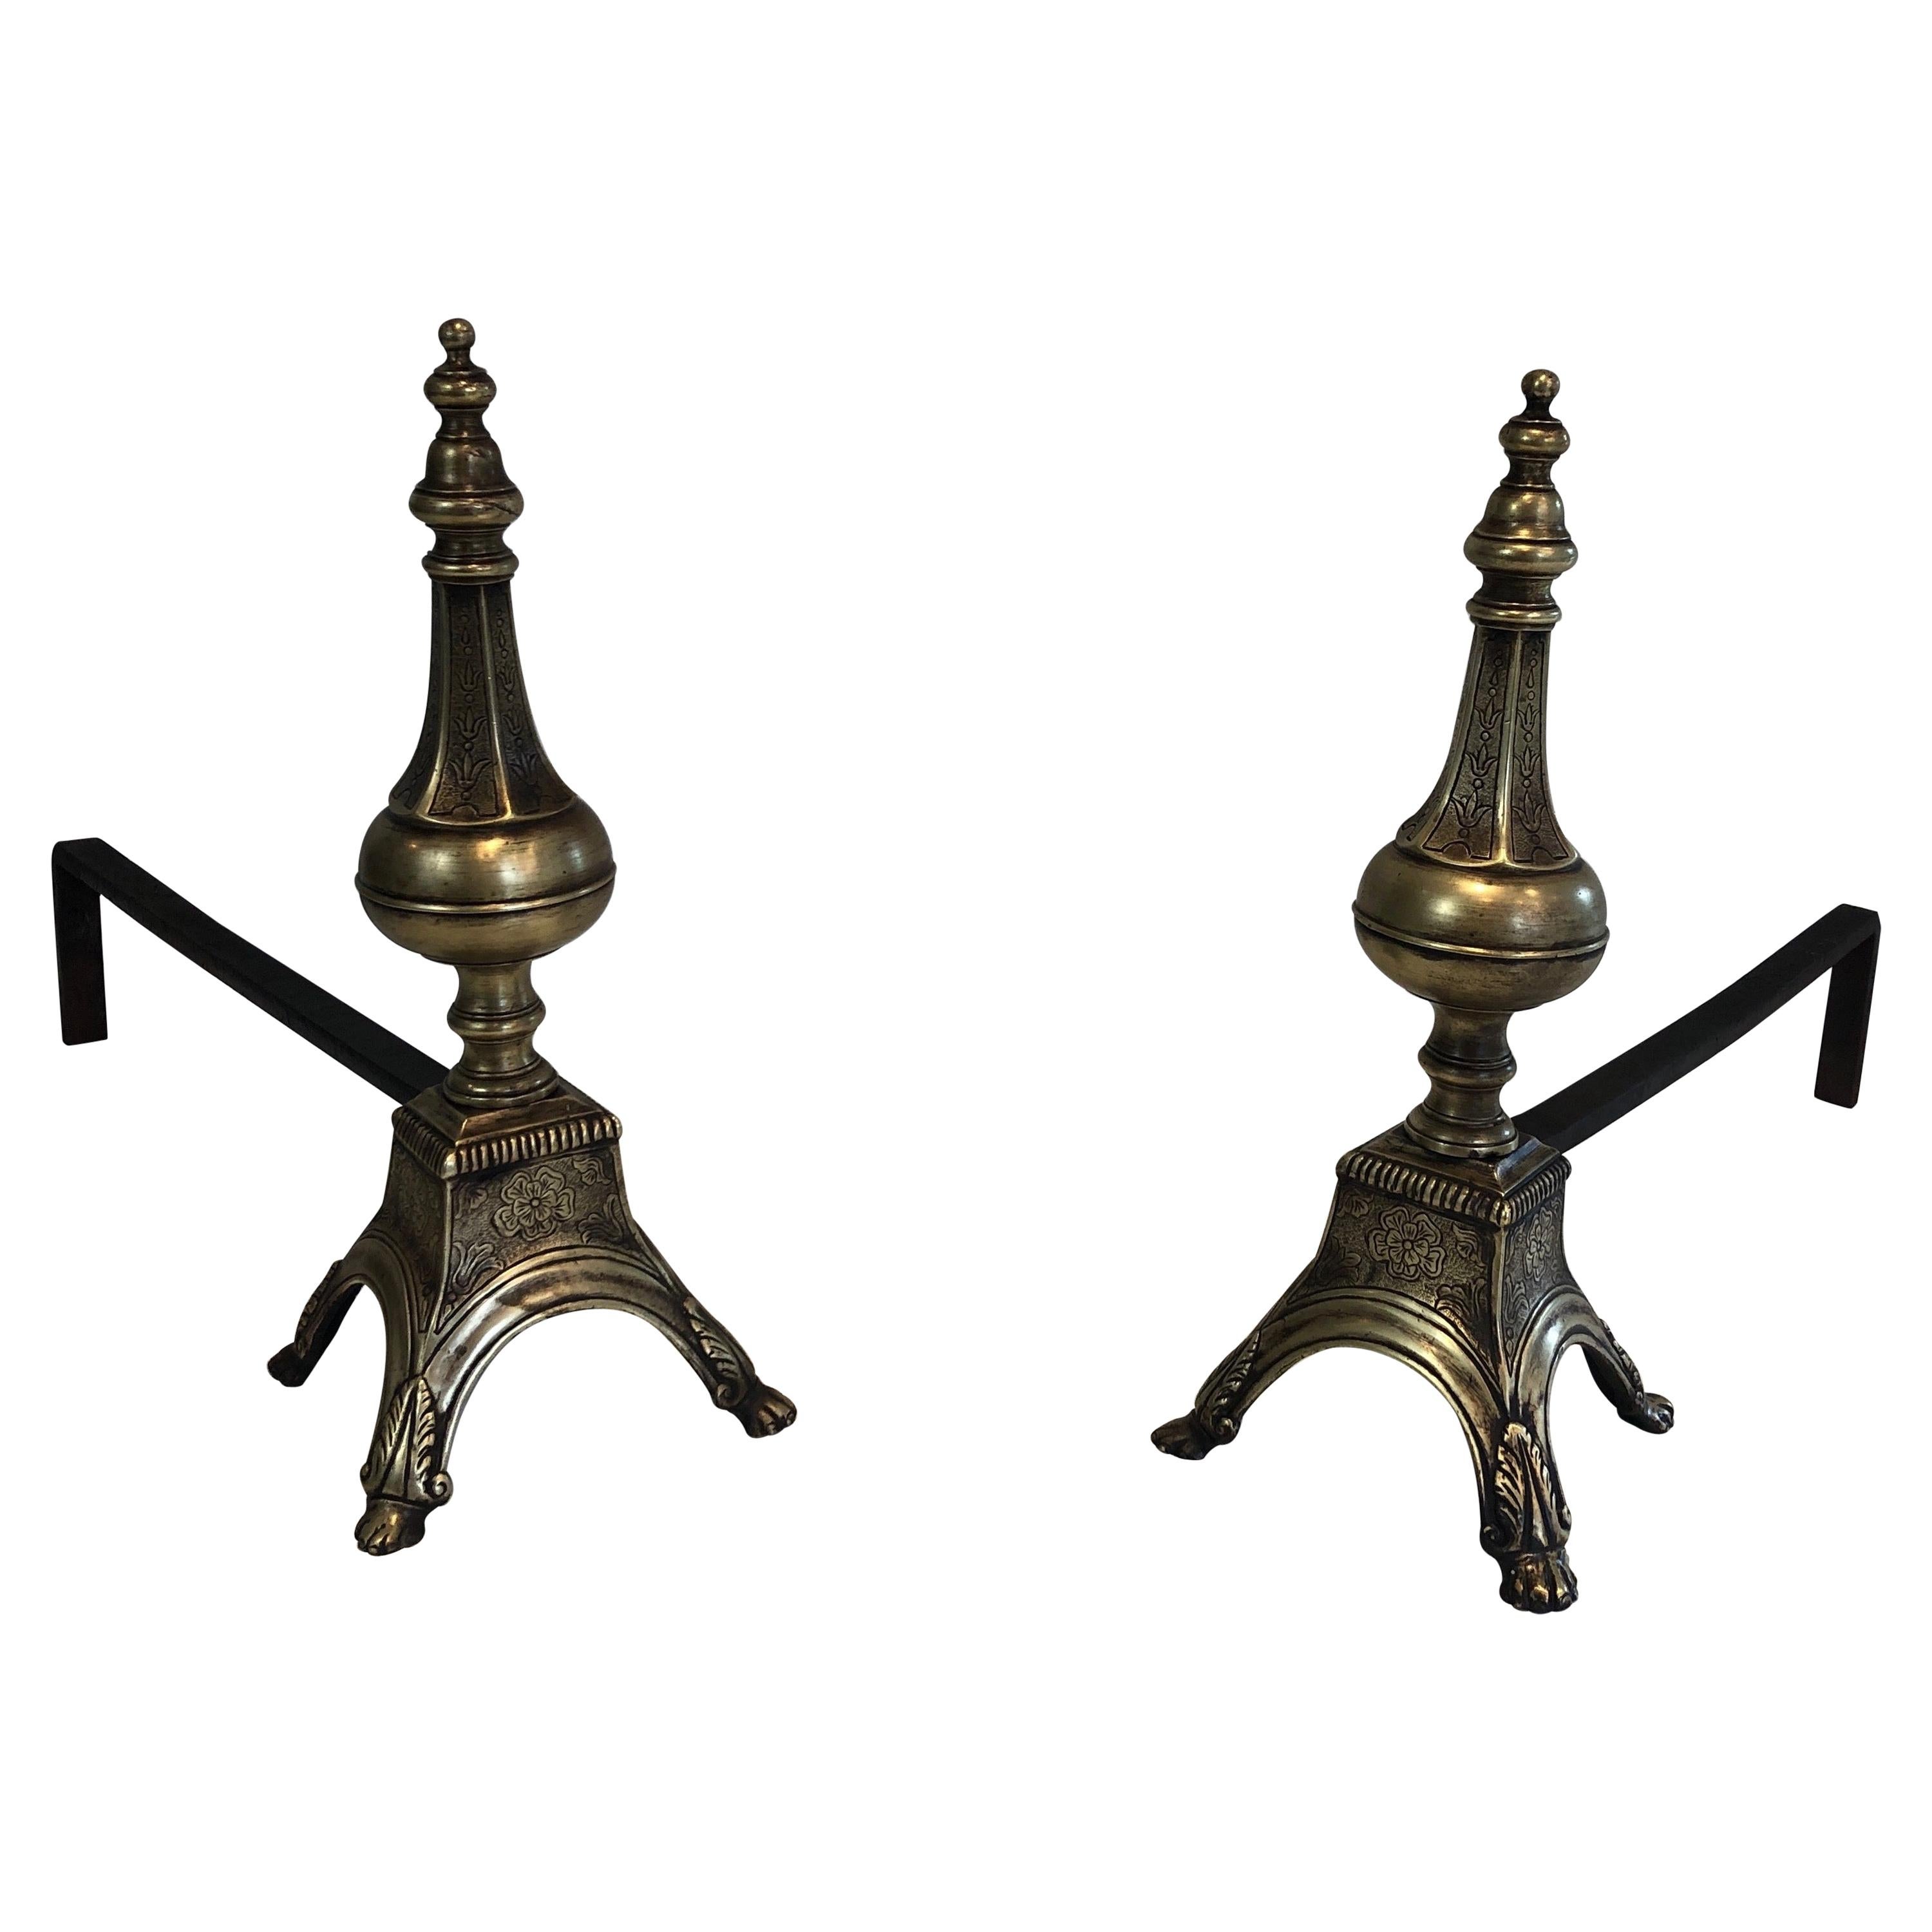 Rare Pair of Louis the 16th Style Bronze & Wrought Iron Andirons, 19th Century